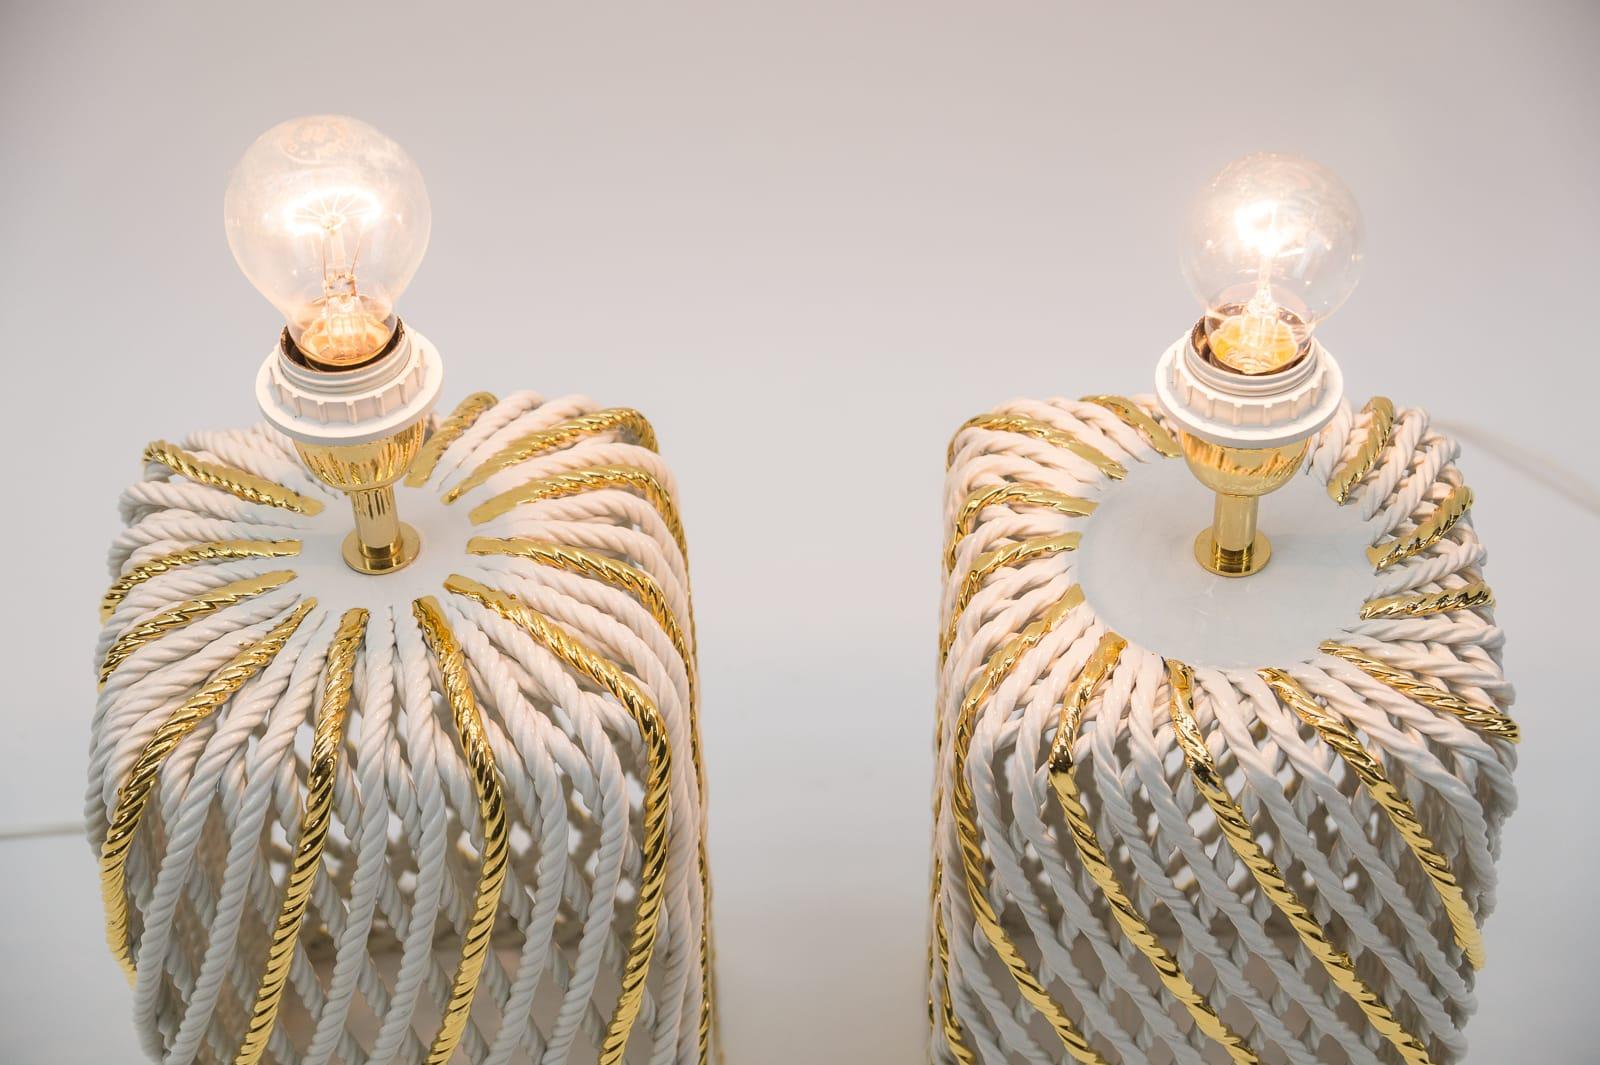 Pair of Extravagant Ceramic Braid Table Lamps, 1980s Italy For Sale 12